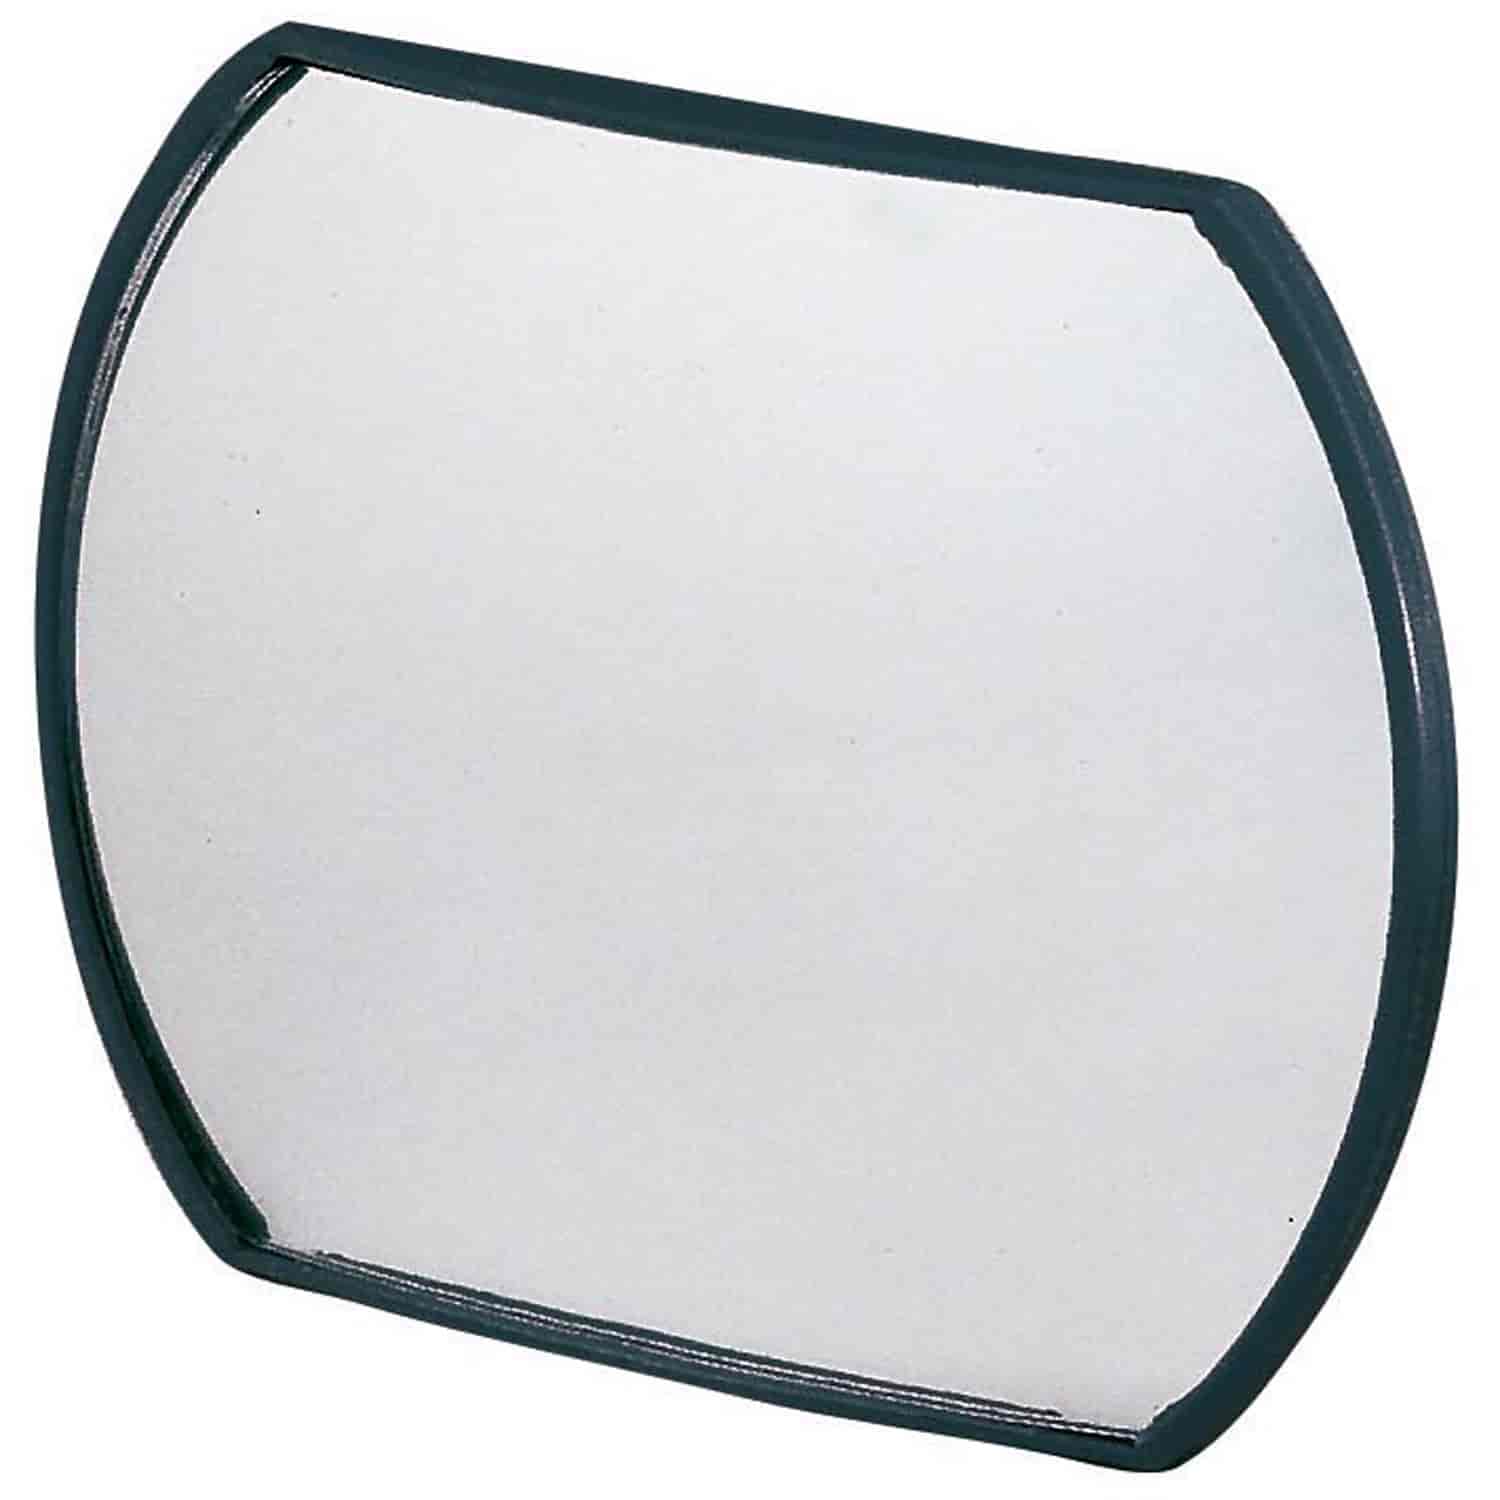 Stick-On Oval Mirror This mirror is 5-1/2 inches wide and 4 inches tall.